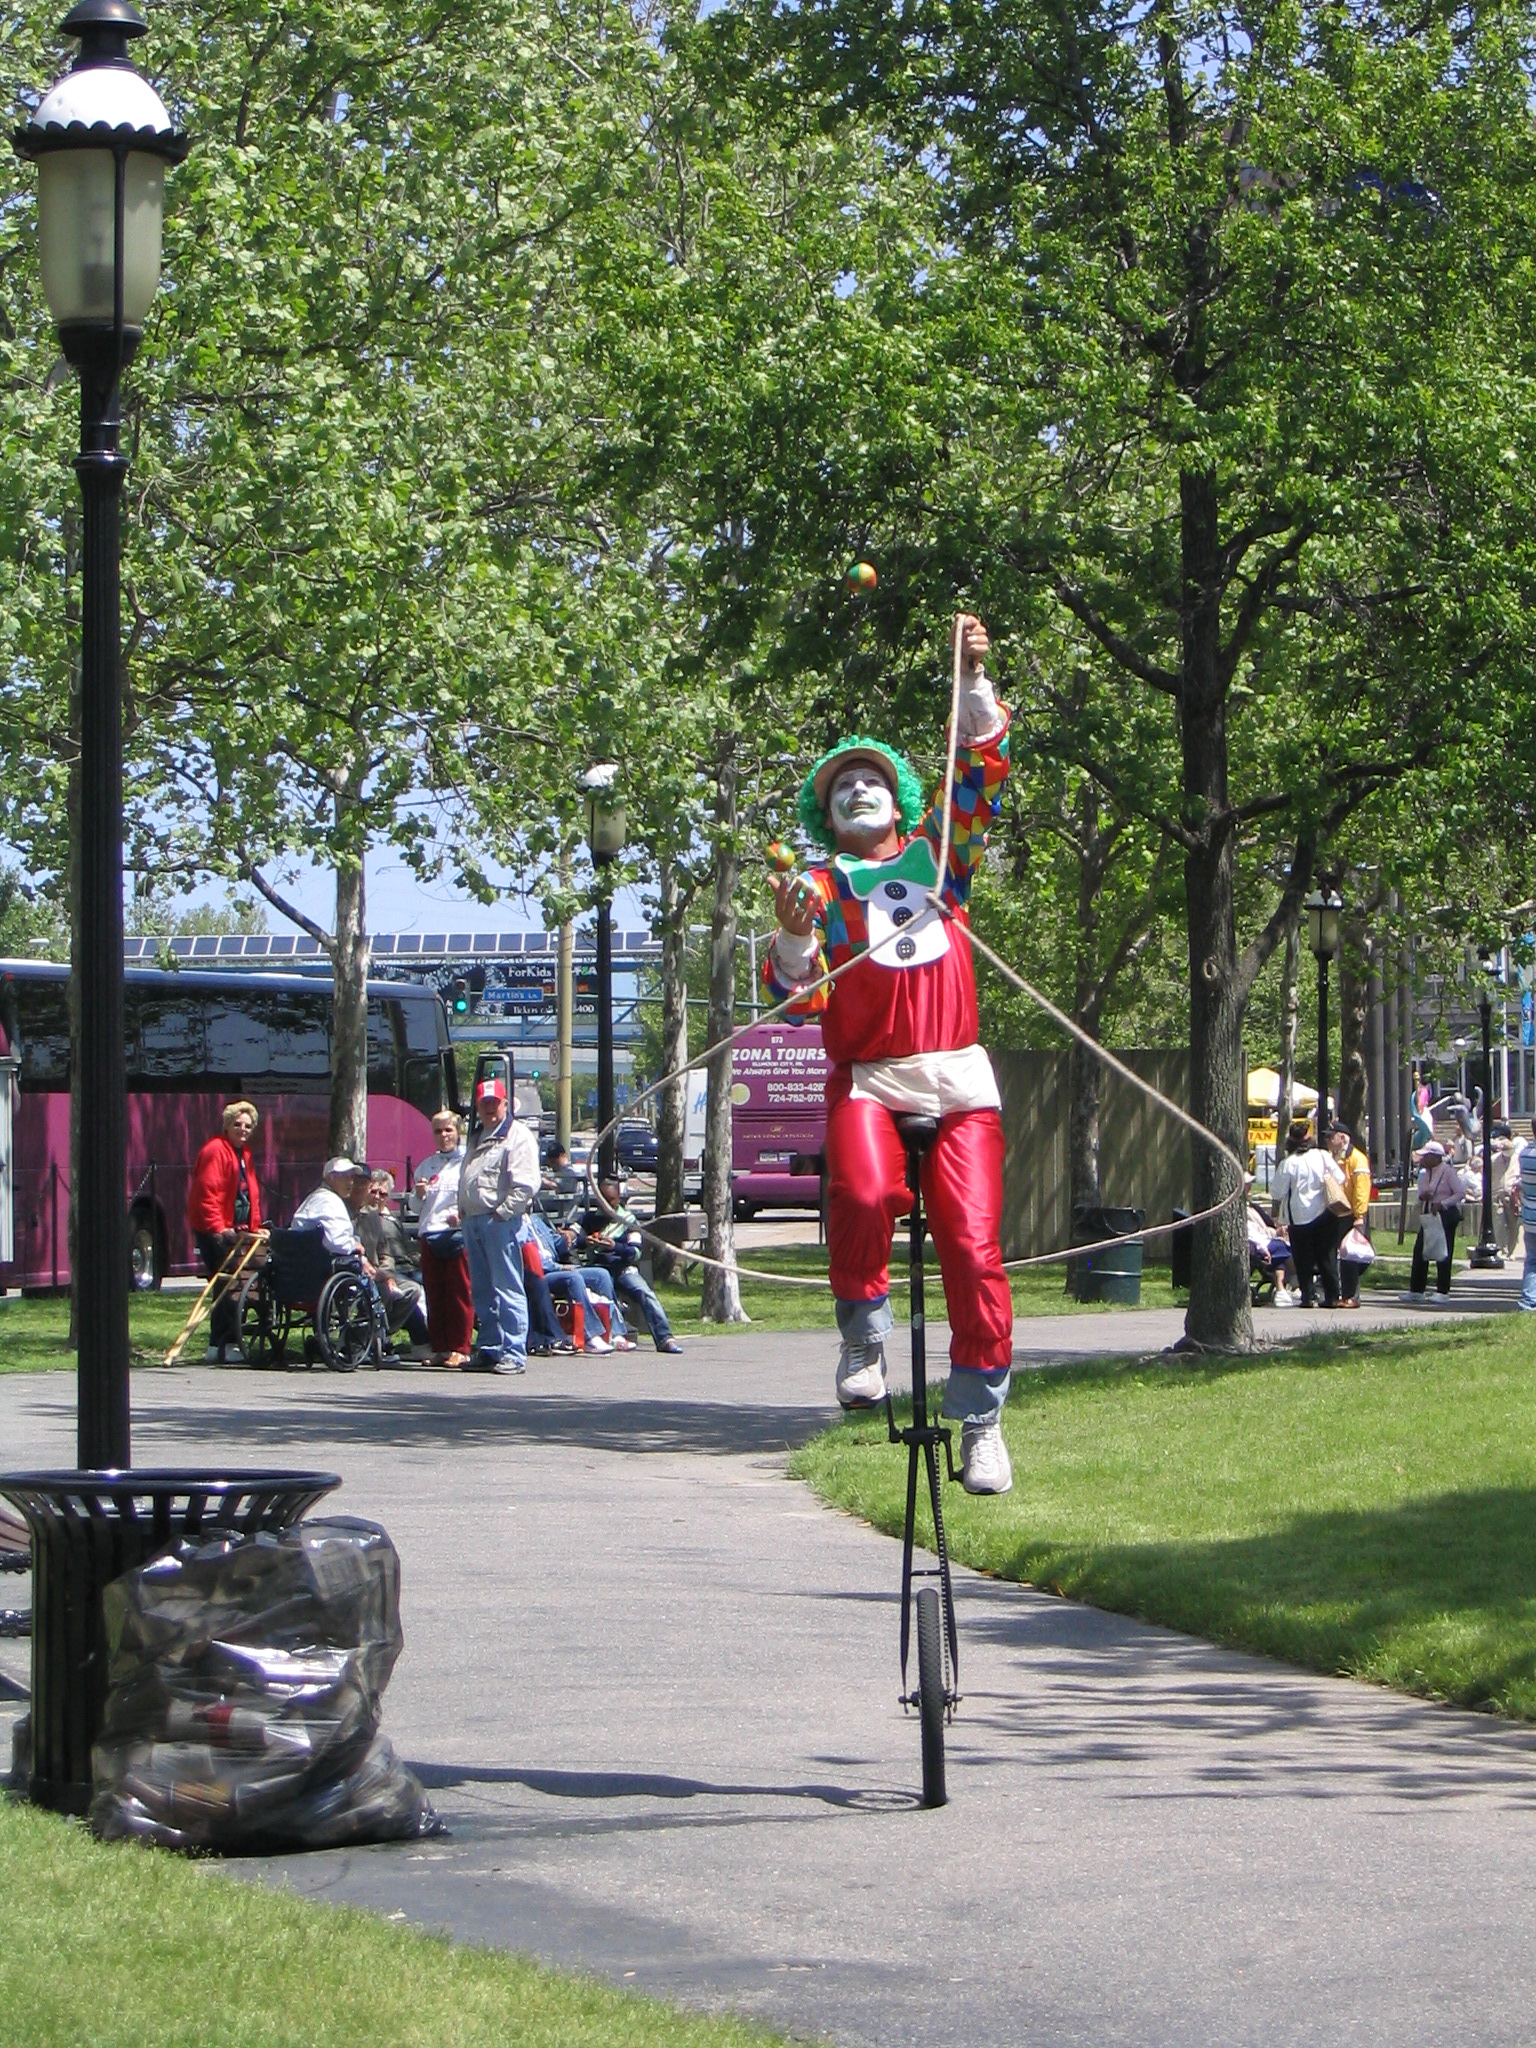 Unicycle-rope-juggle super clown